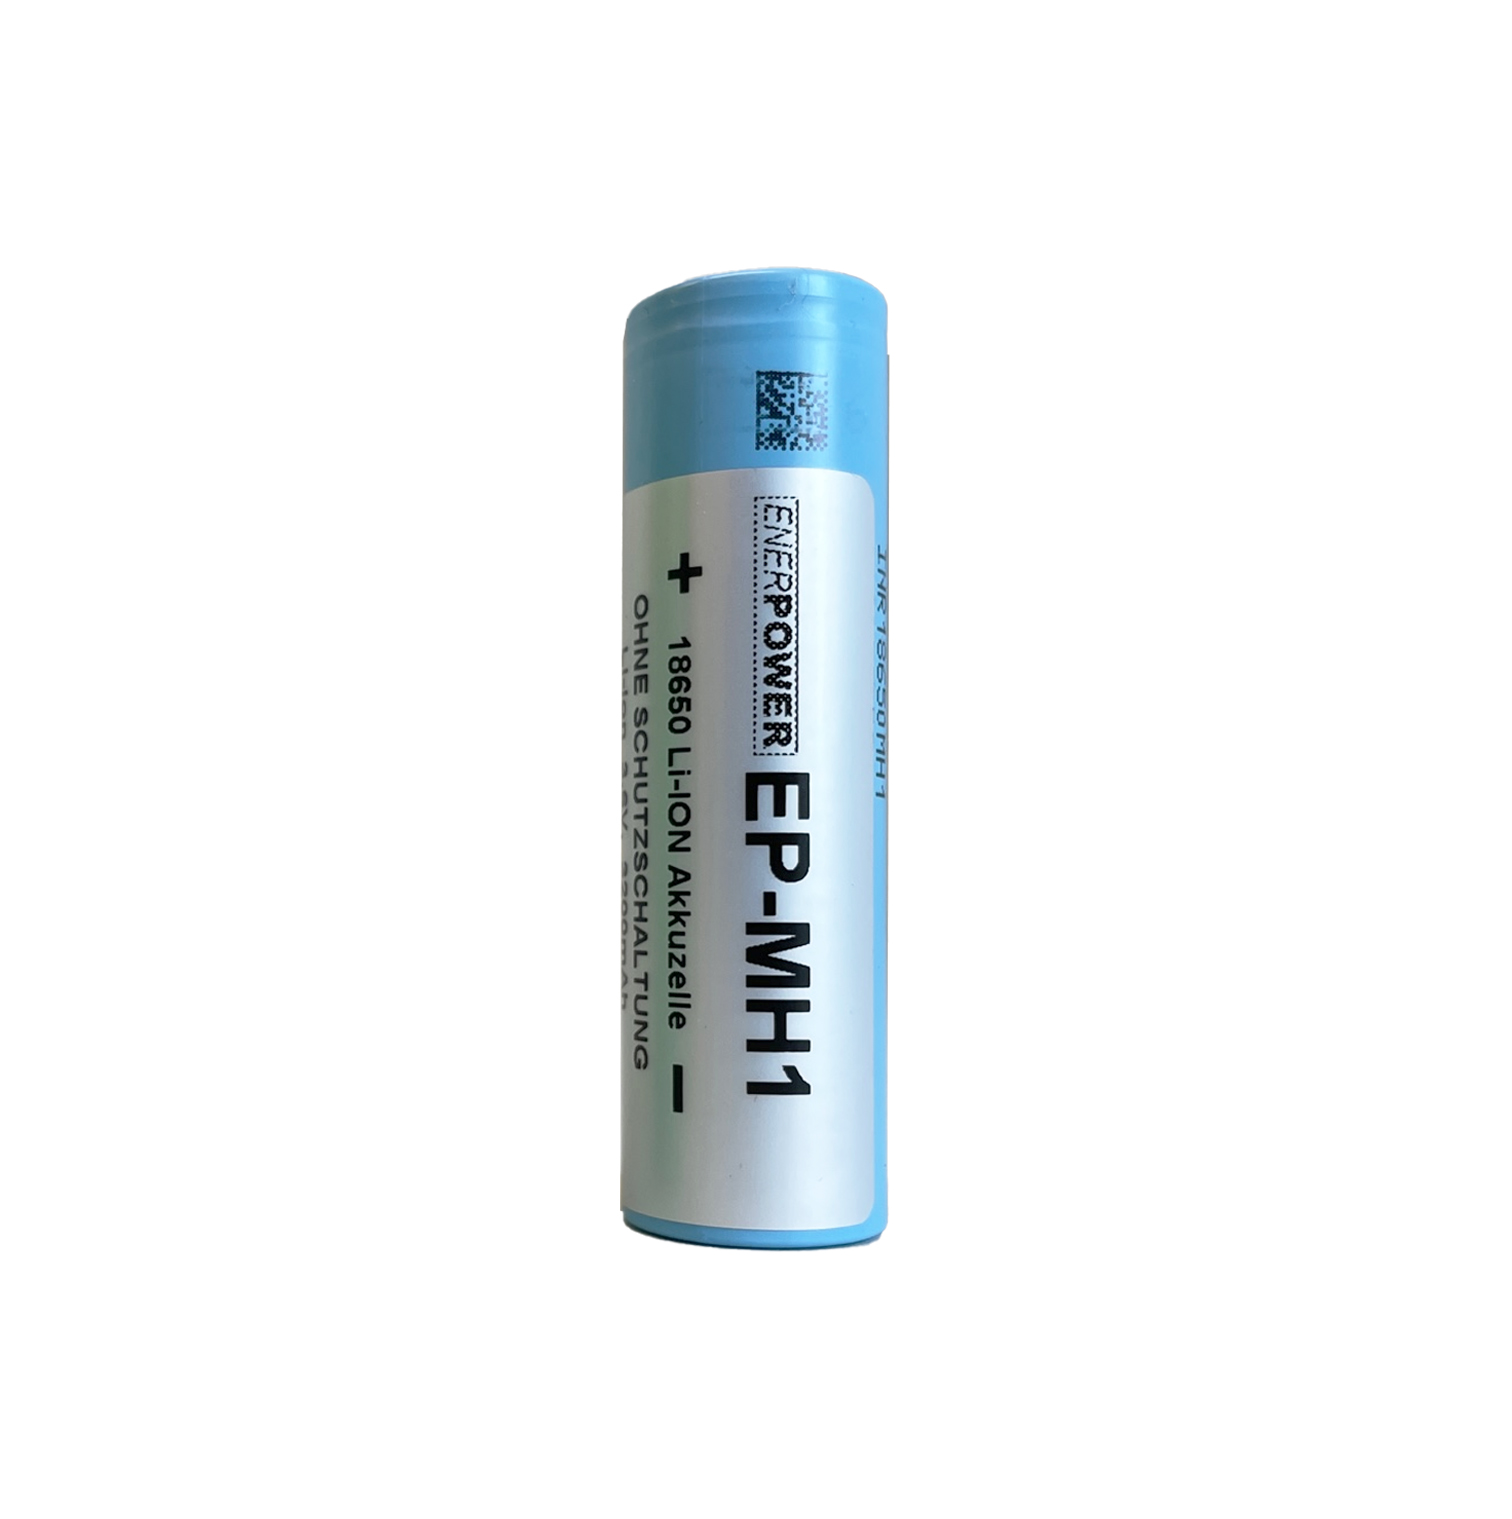 18650 lithium rechargeable battery, 3.7V, 3200mAh, suitable for